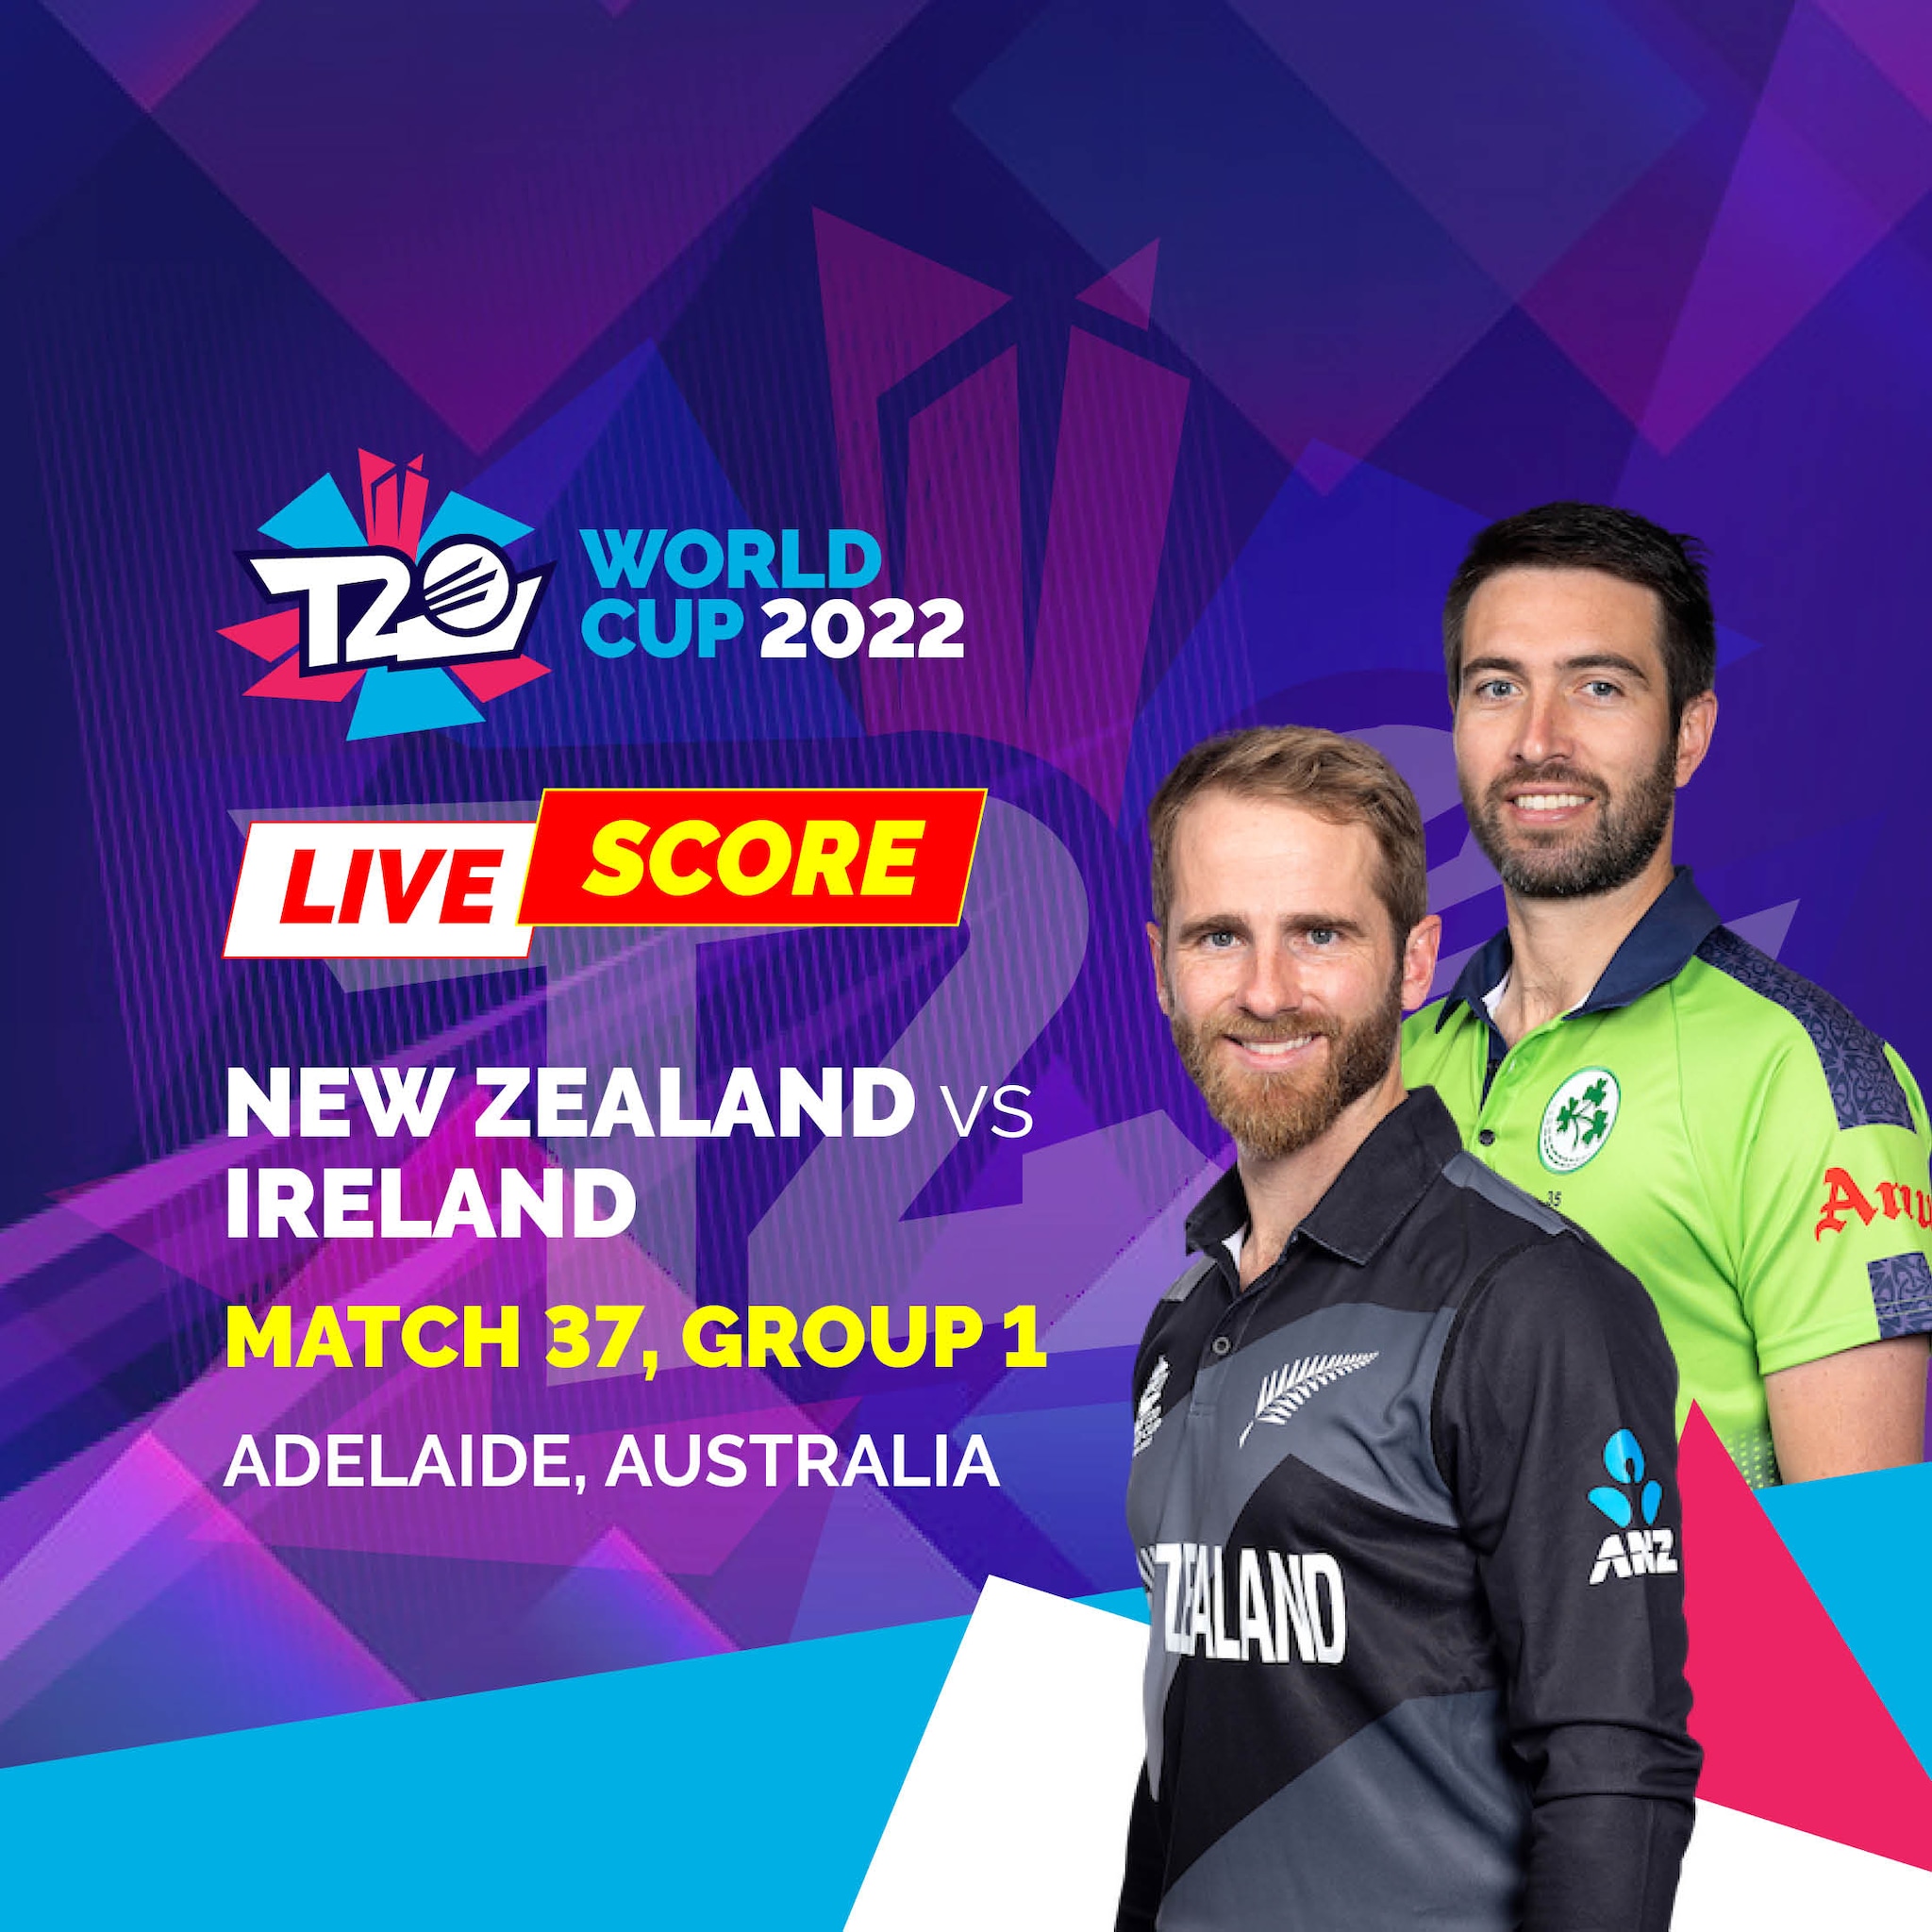 today match t20 world cup